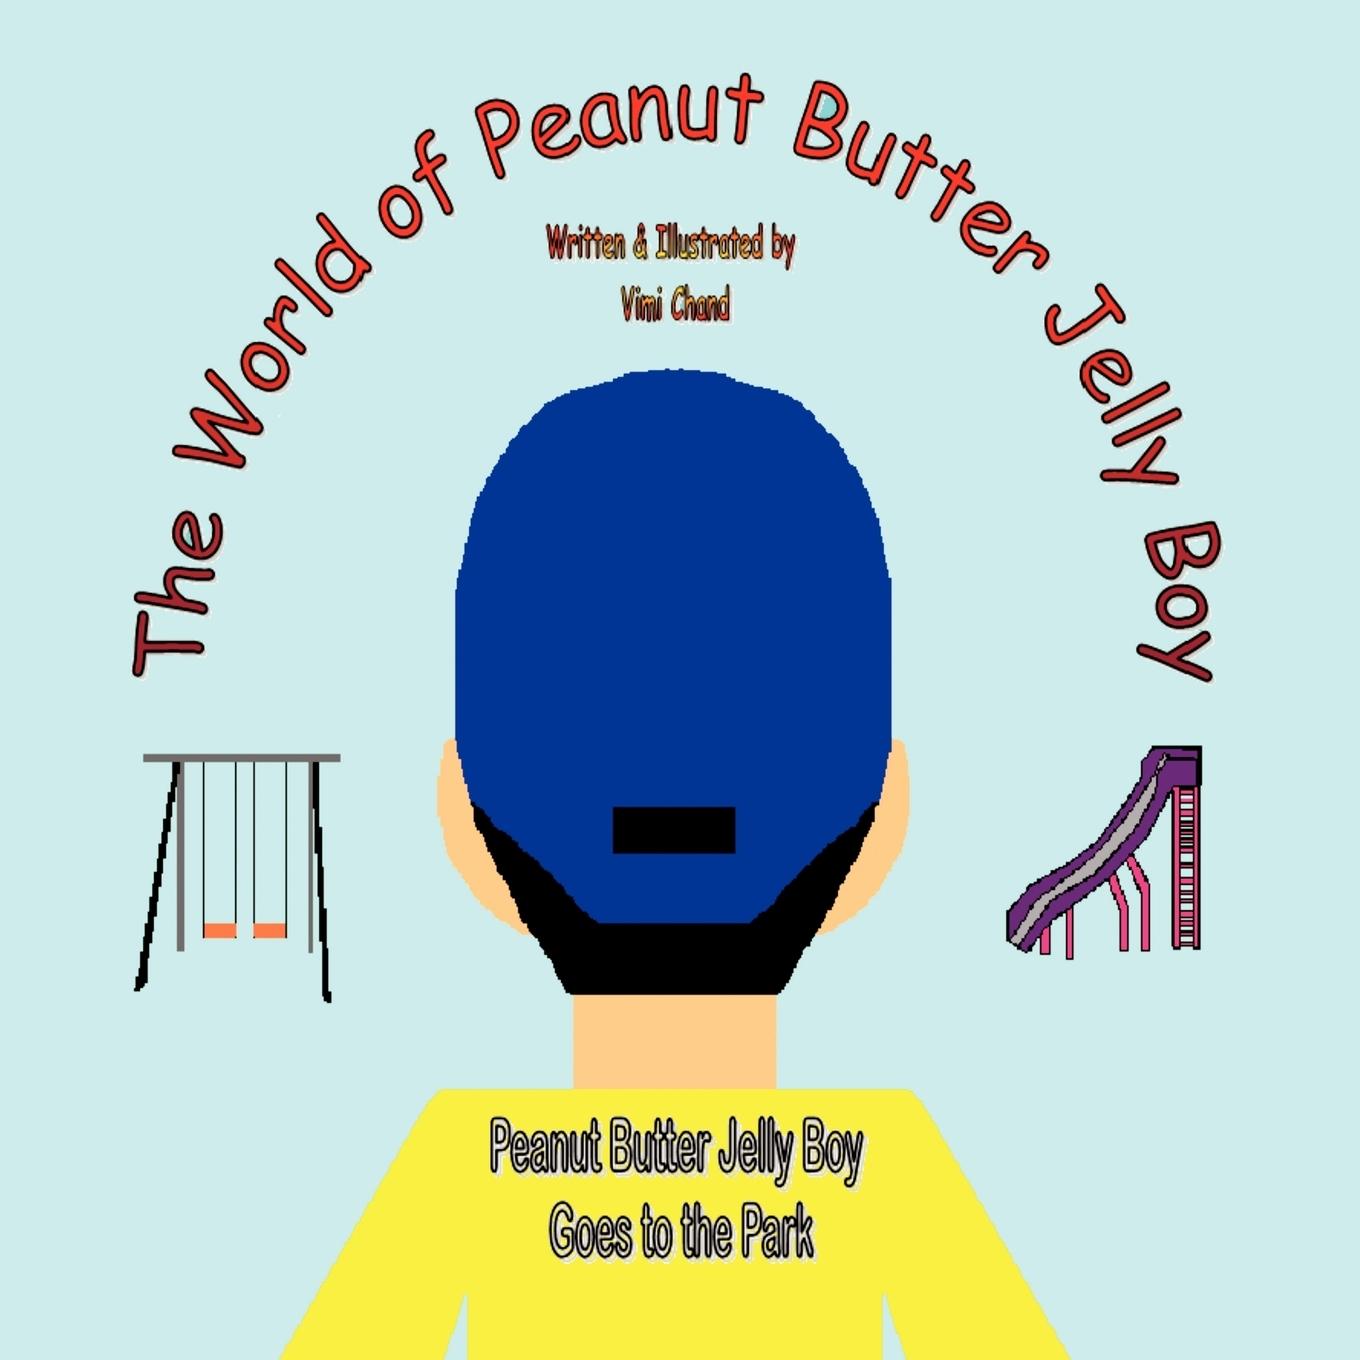 The World of Peanut Butter Jelly Boy - Chand, Vimi